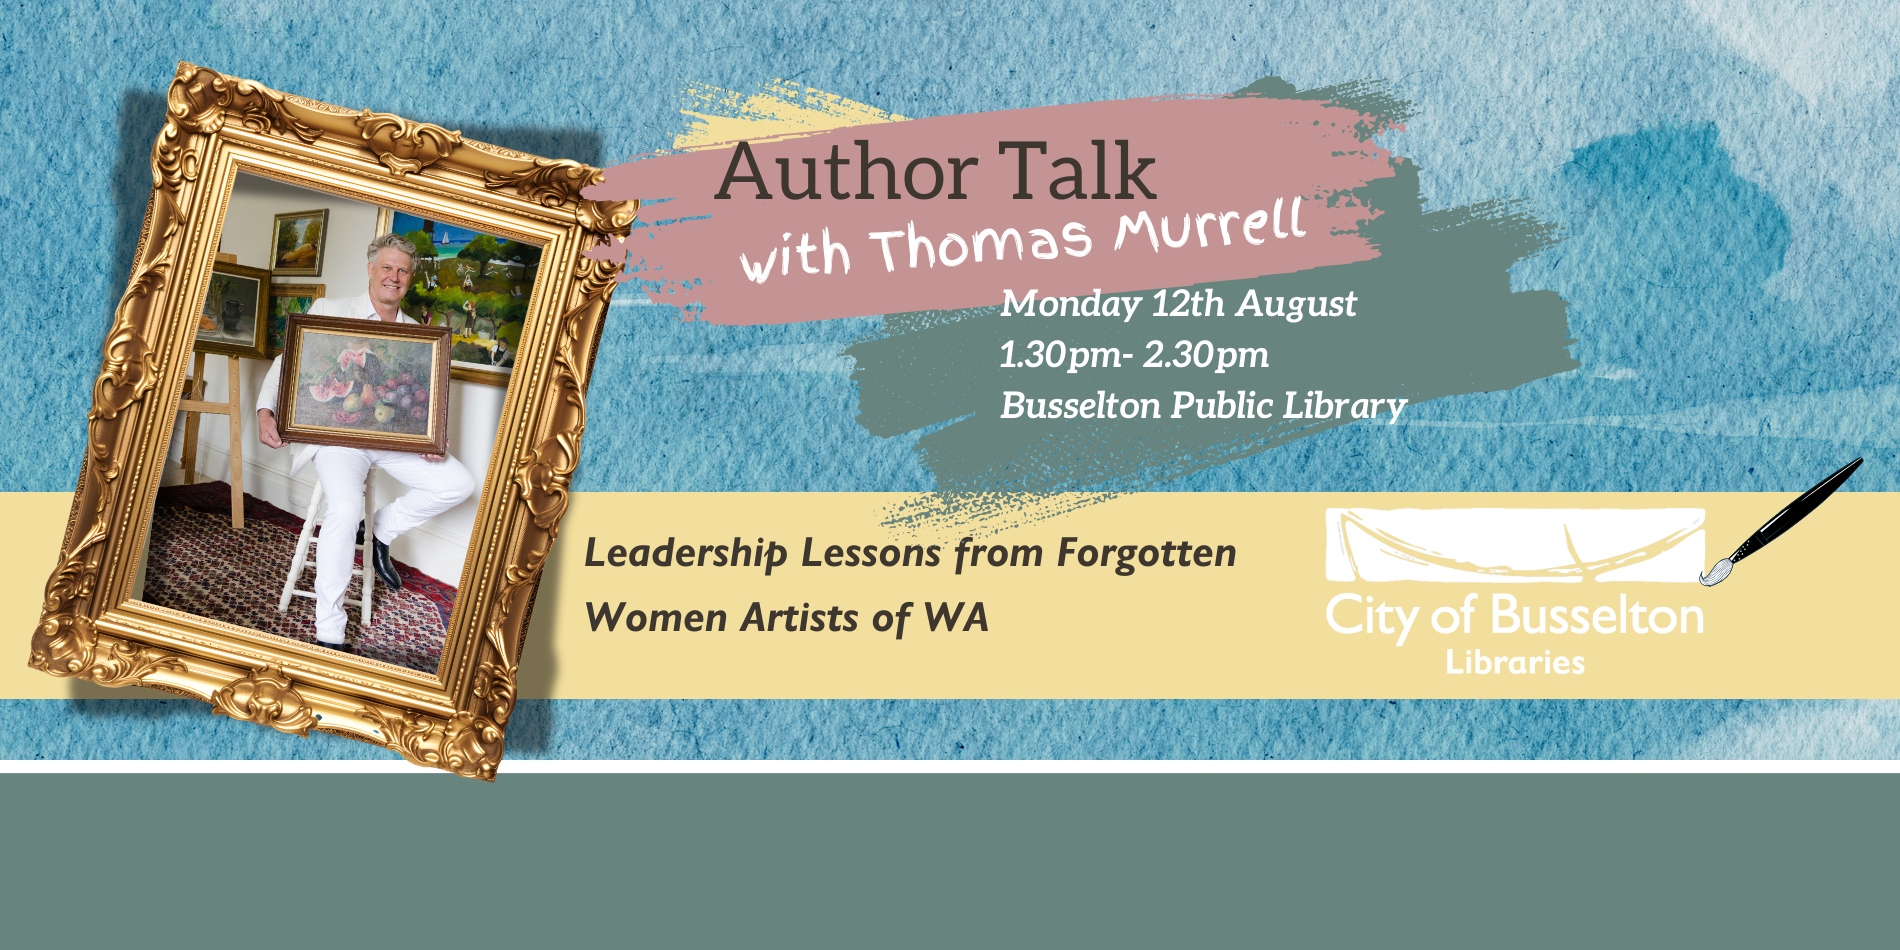 Thomas Murrell, Author visit at the Busselton Library.